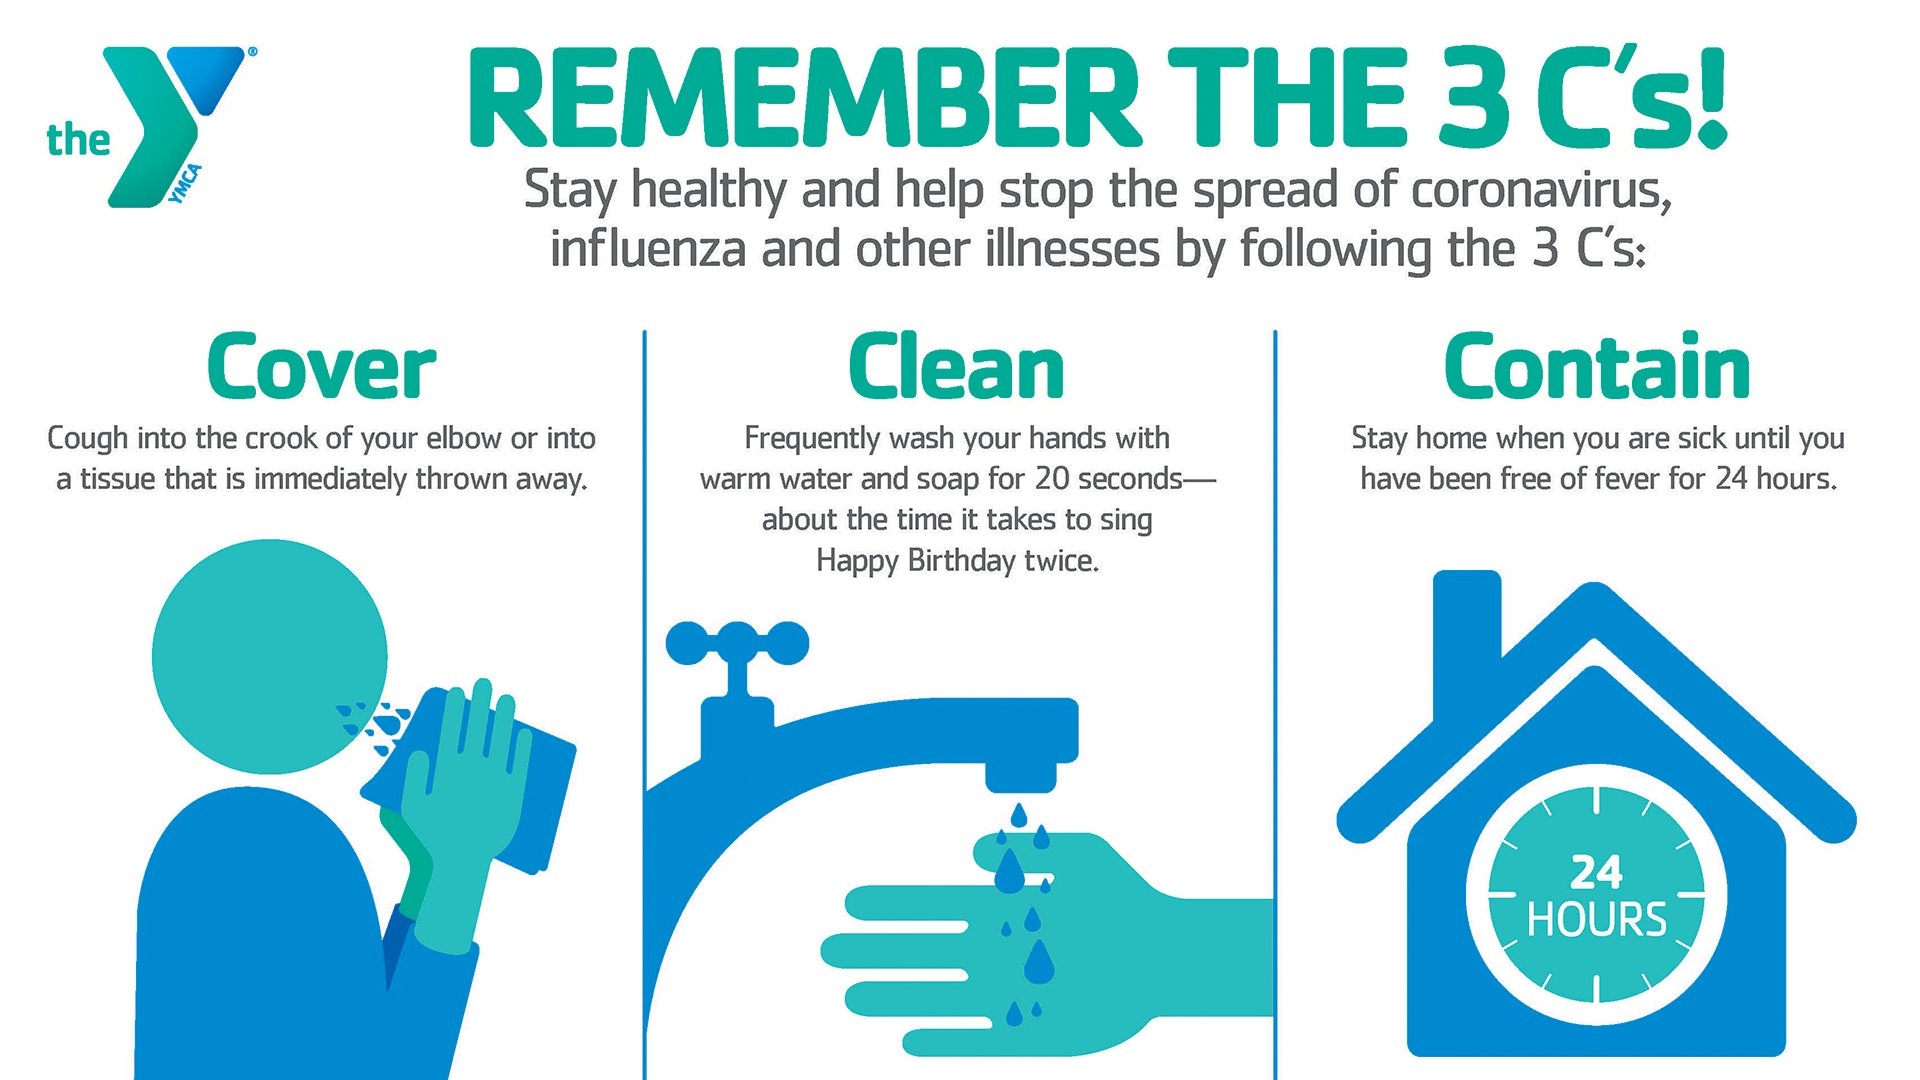 Featured image for “Remember the 3 Cs! Stay healthy and help stop the spread of illnesses.”